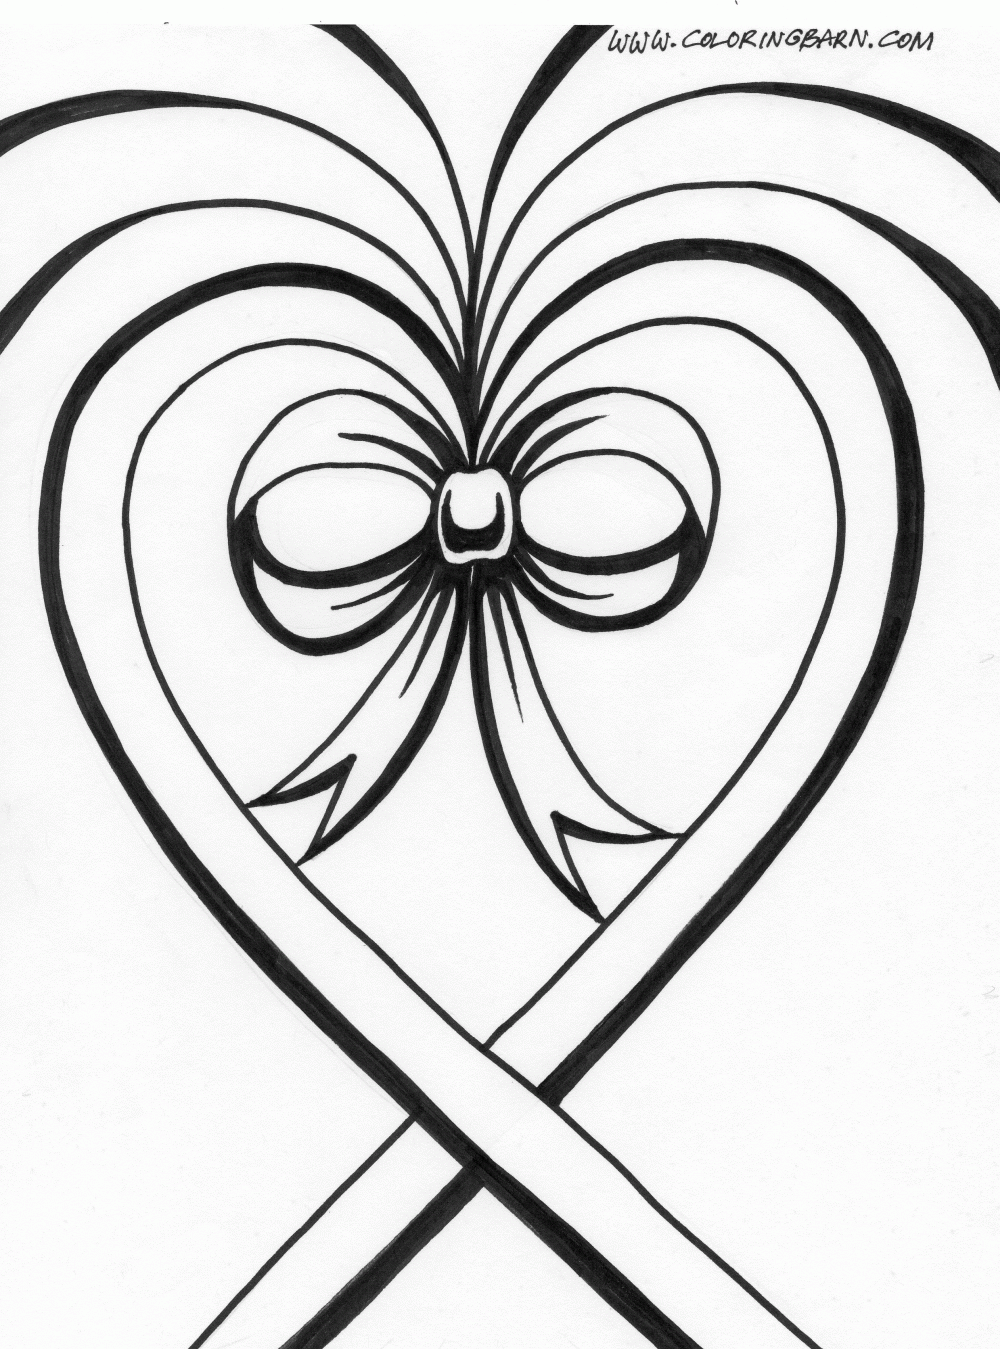 Heart Printable Coloring Pages | The Coloring Barn: Printable ...